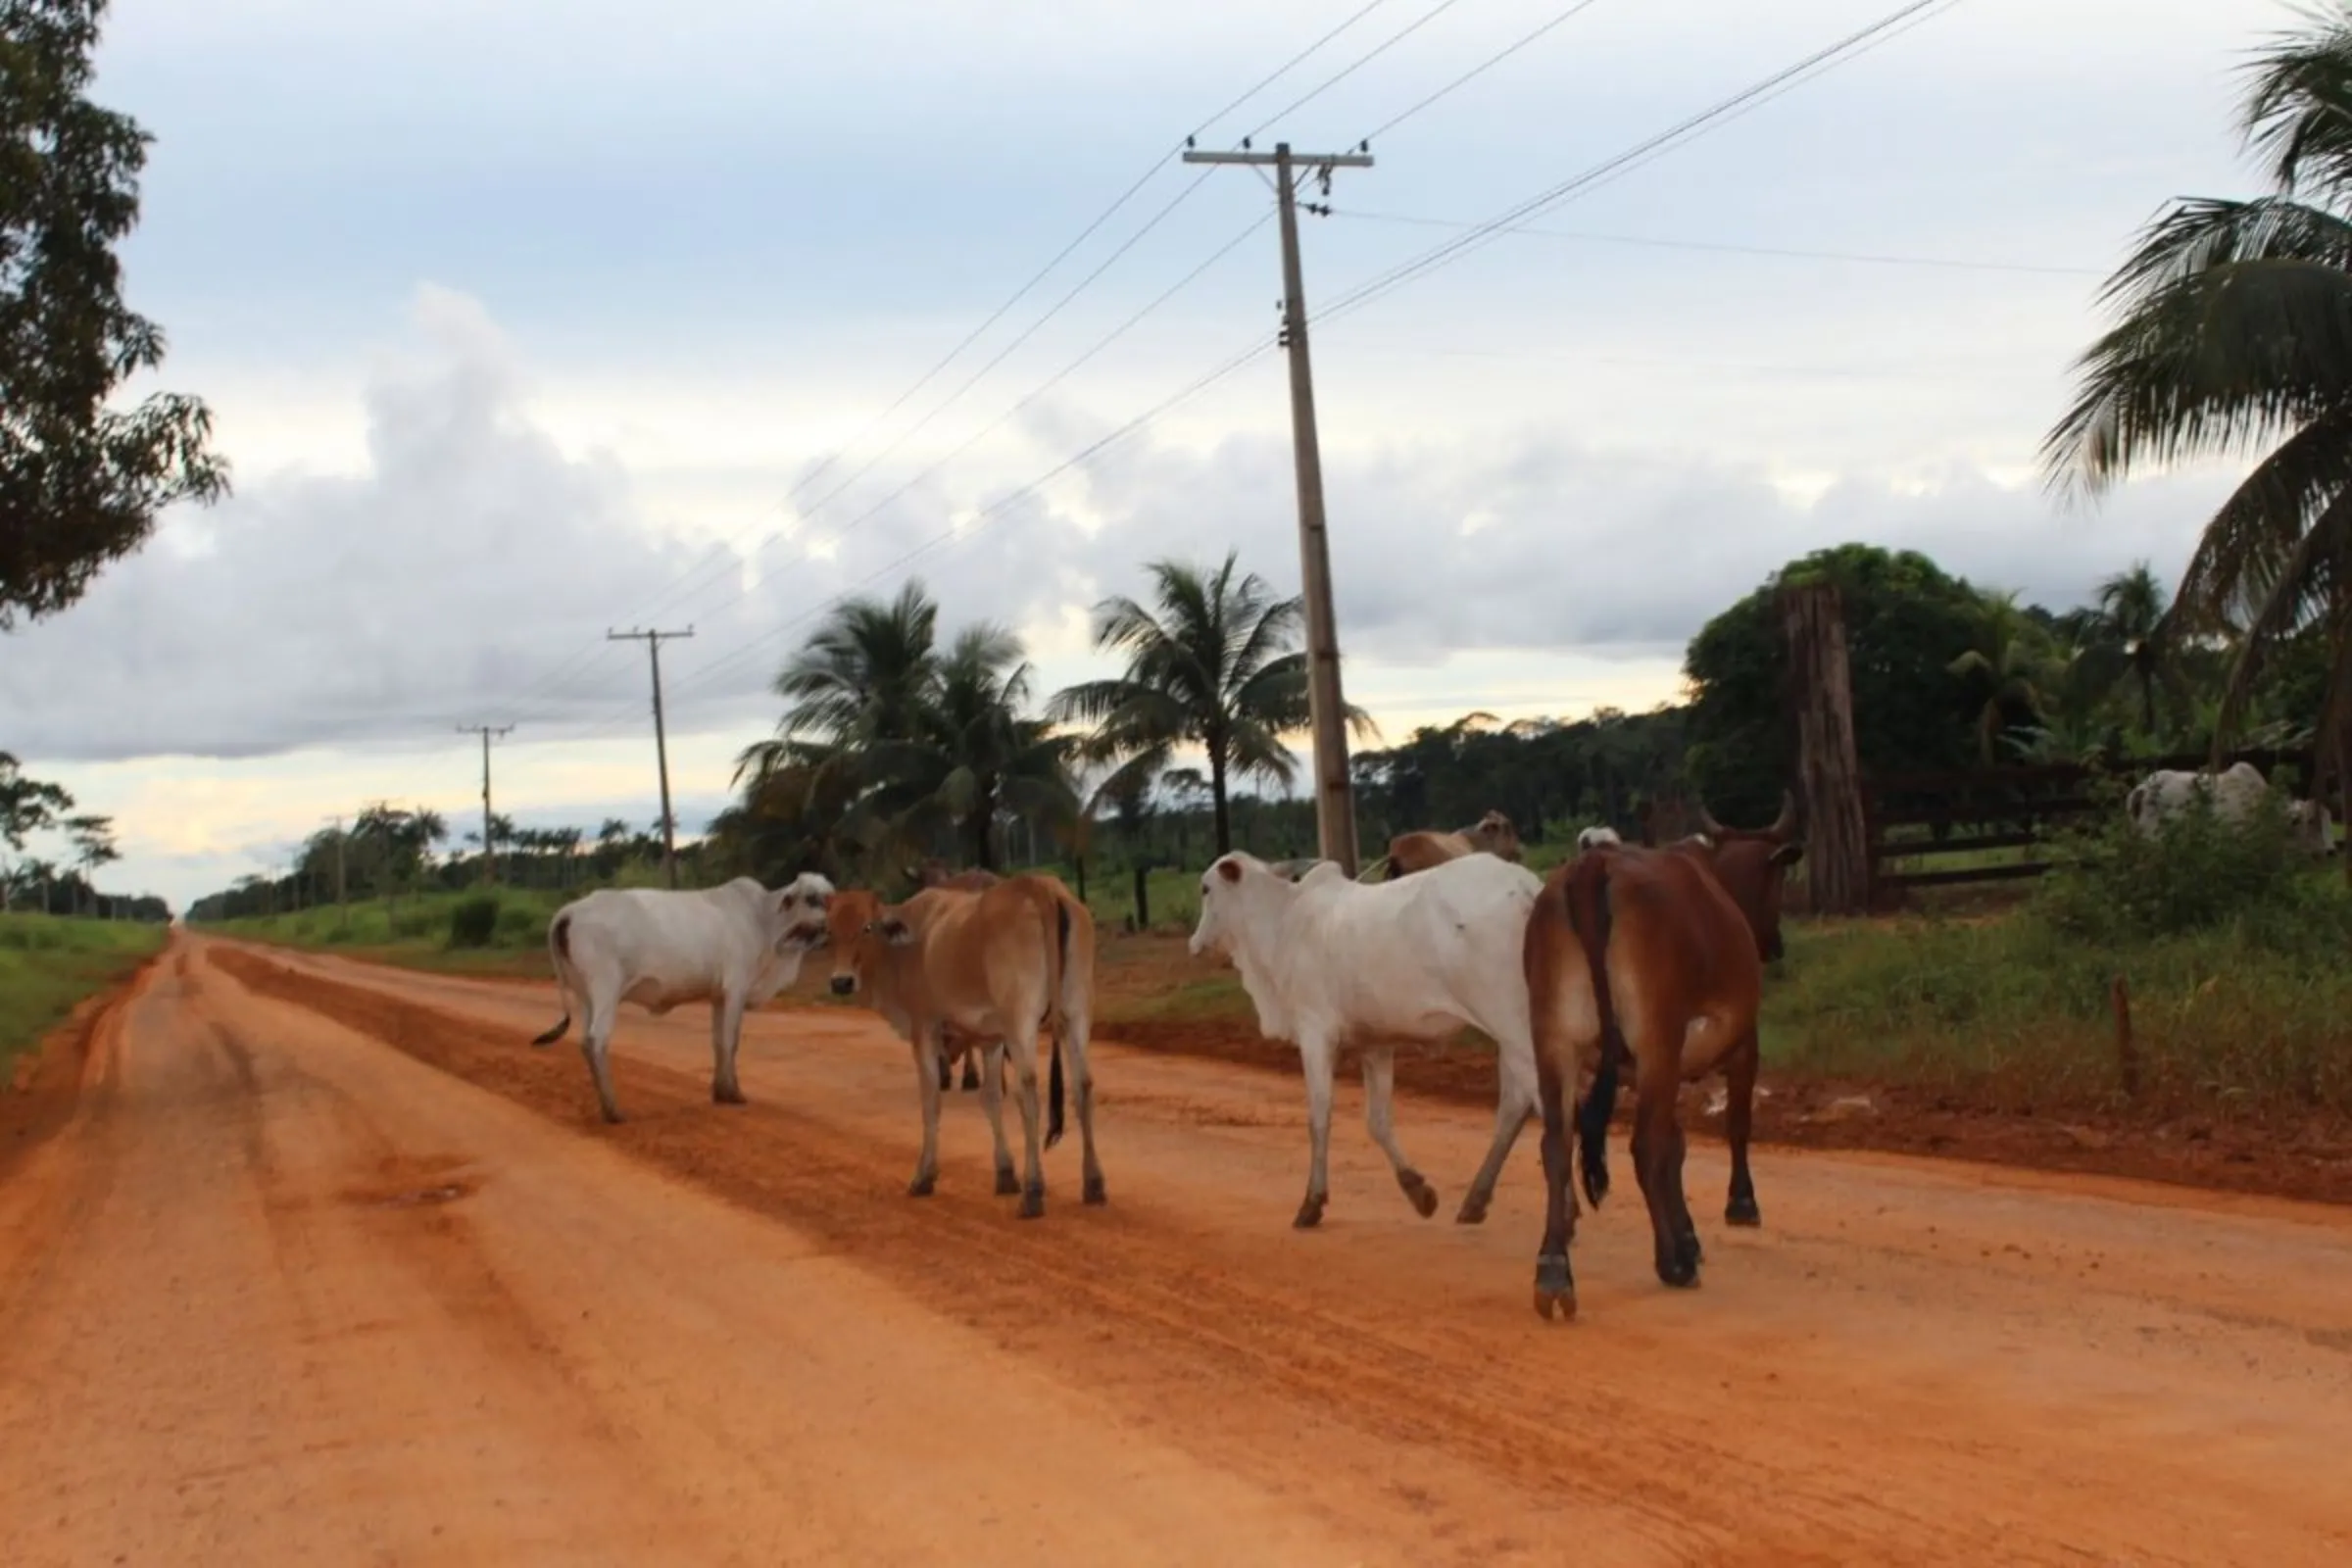 Cattle crossing an unpaved section of the BR-319 road, whose paving could drive deforestation, in Humaitá, Amazonas state, Brazil, February 27, 2023. THOMSON REUTERS FOUNDATION/André Cabette Fábio